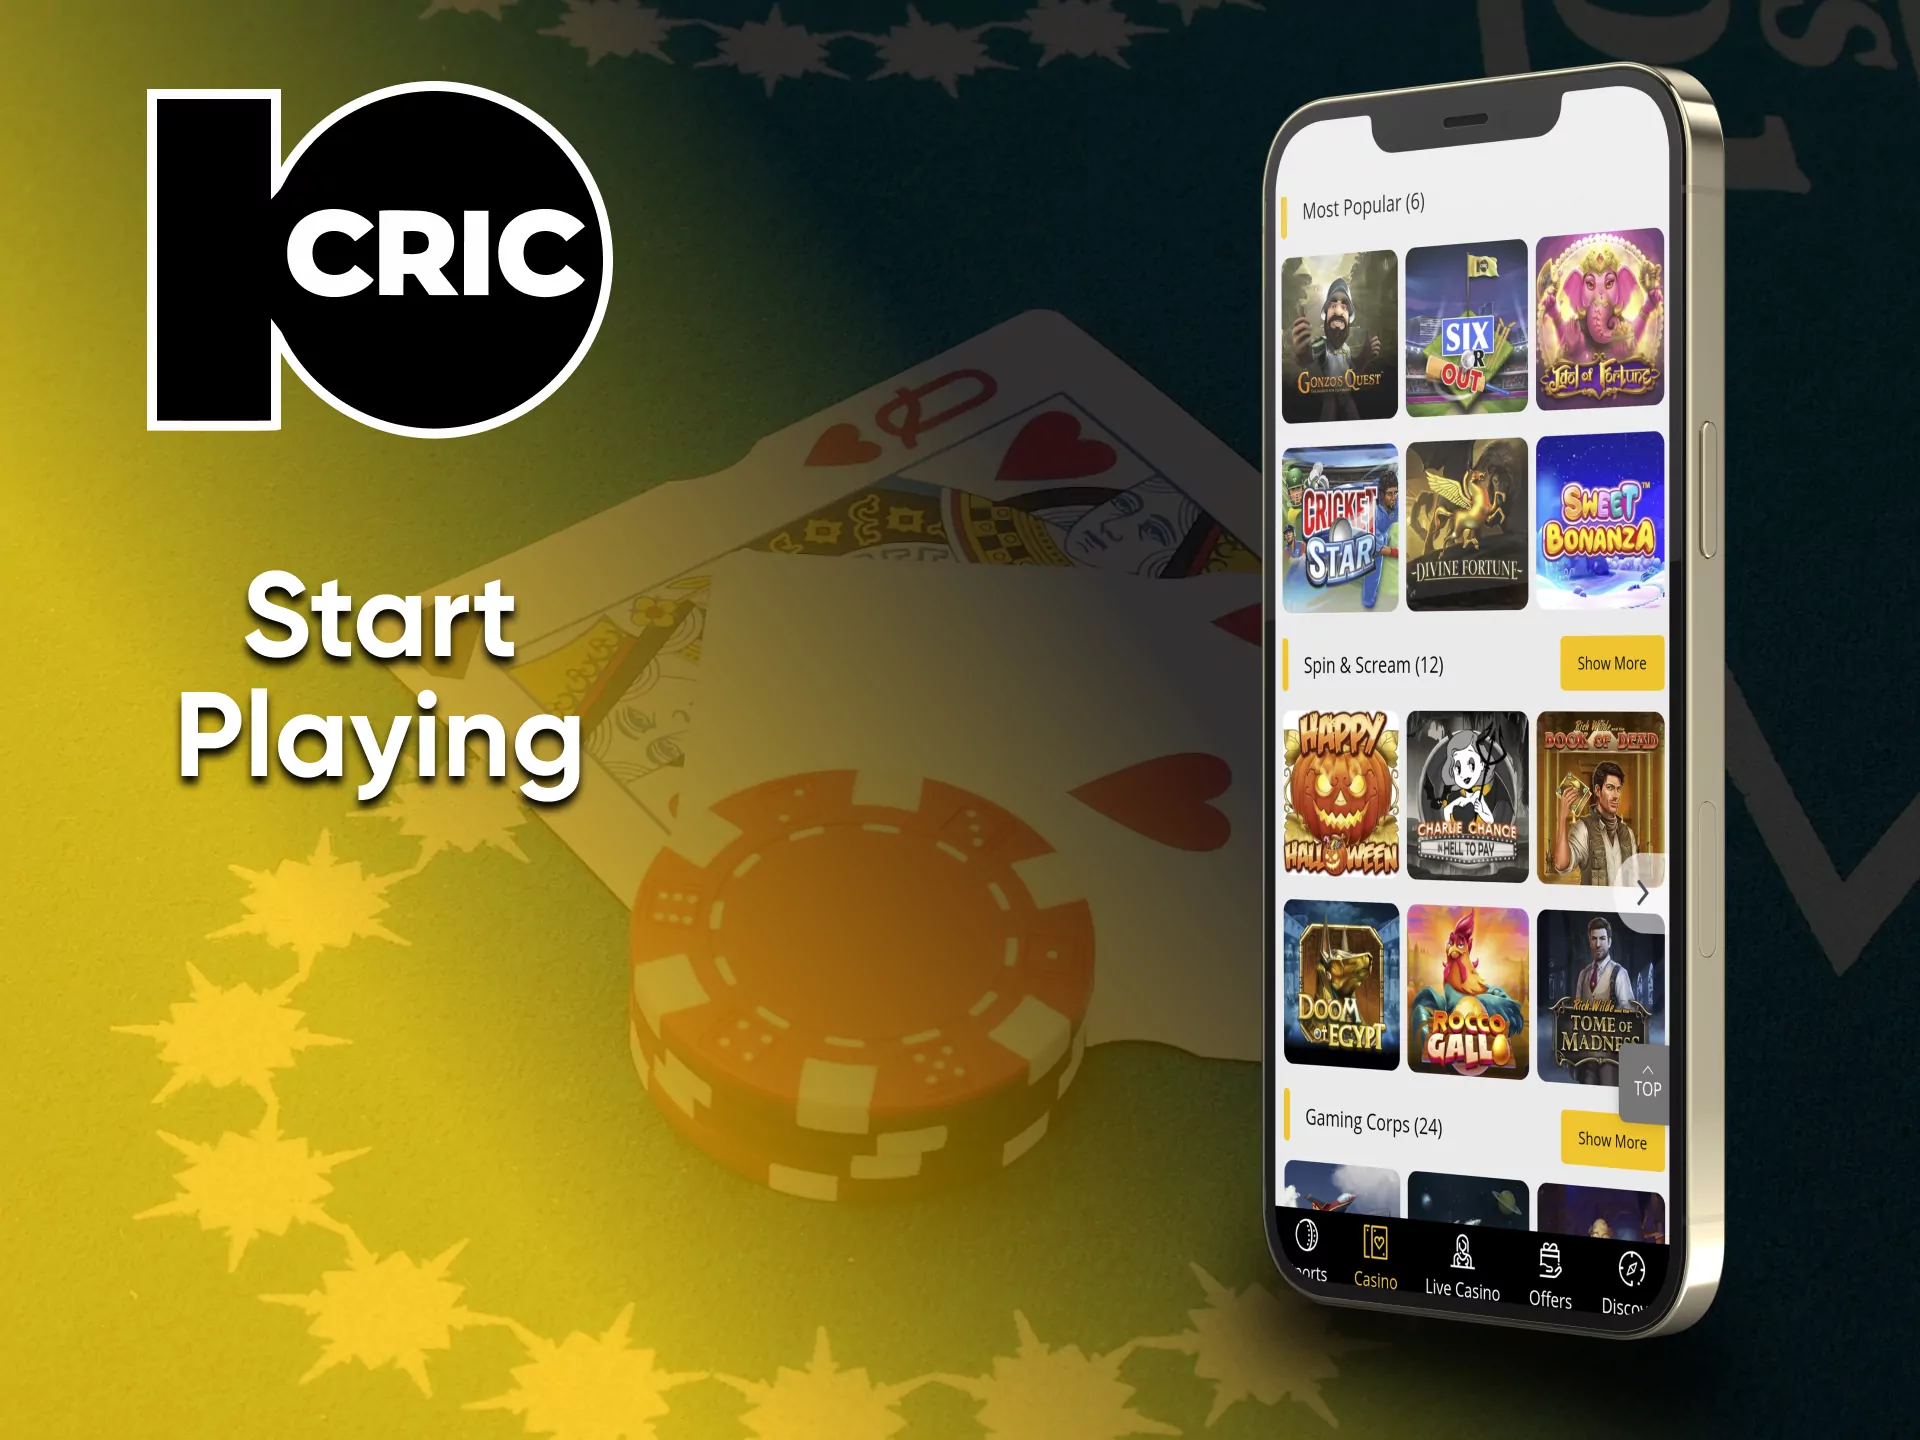 Play casino from 10Сric on your device.